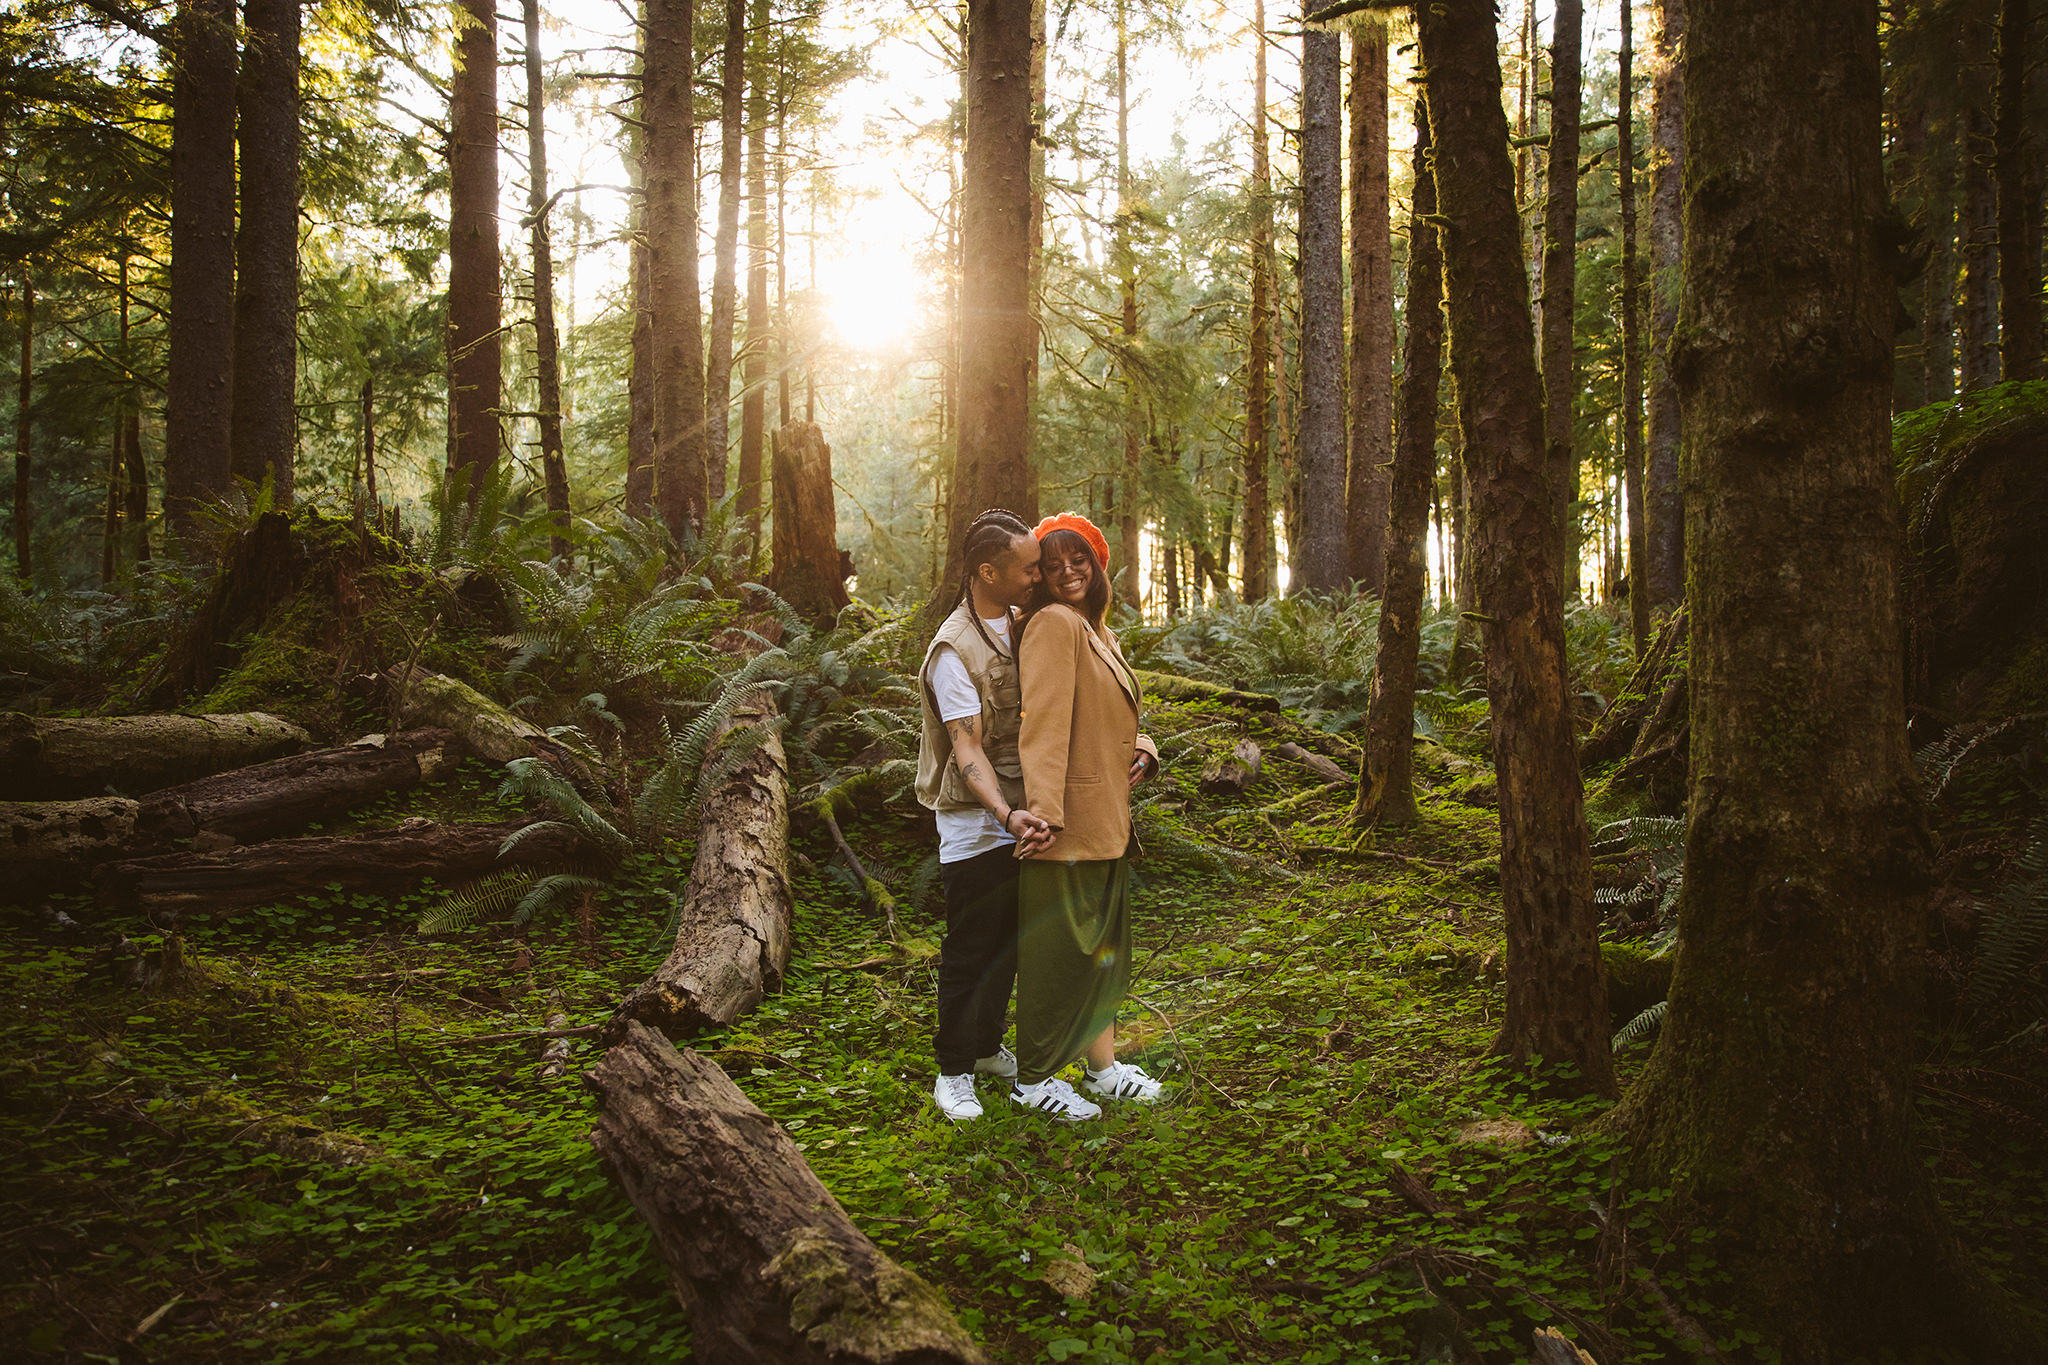 An engagement photo in the Oregon woods